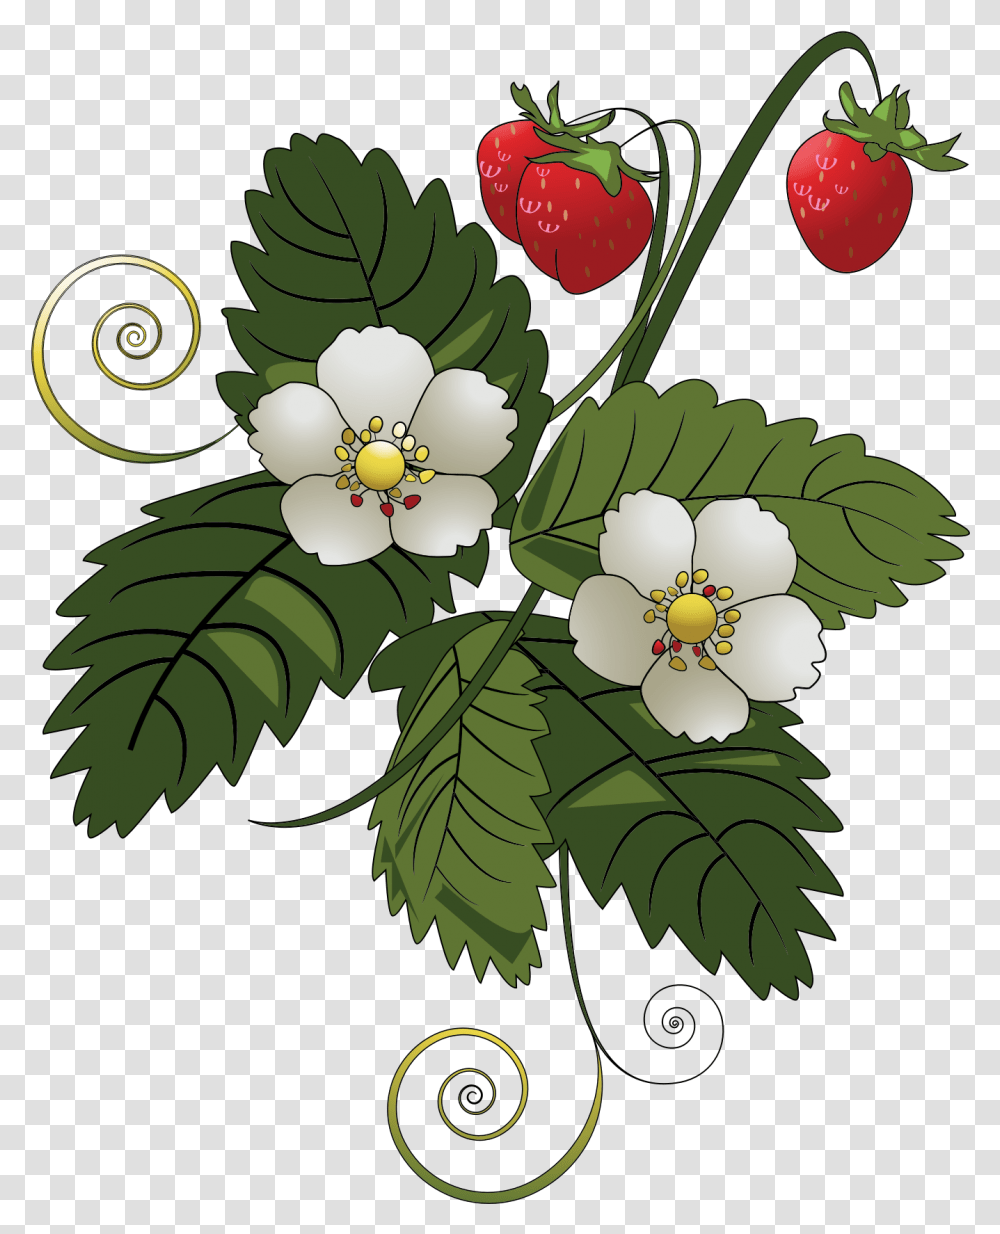 Download Big Image Strawberry Tree Clip Art Full Size Strawberry Plant Background, Graphics, Floral Design, Pattern, Green Transparent Png